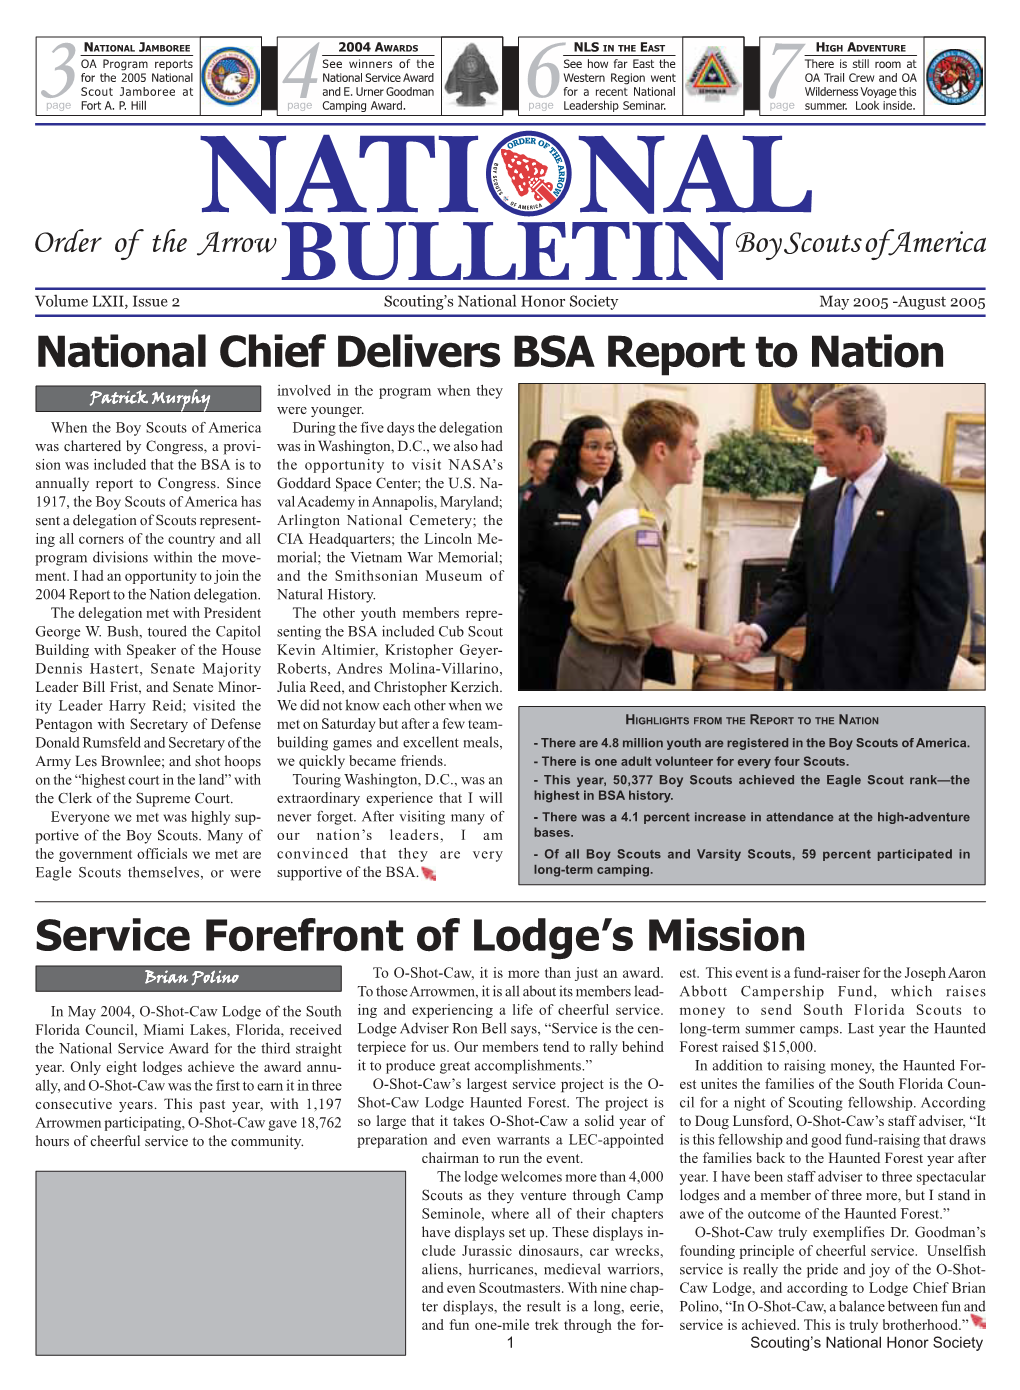 August 2005 National Chief Delivers BSA Report to Nation Involved in the Program When They Patrick Murphy Were Younger